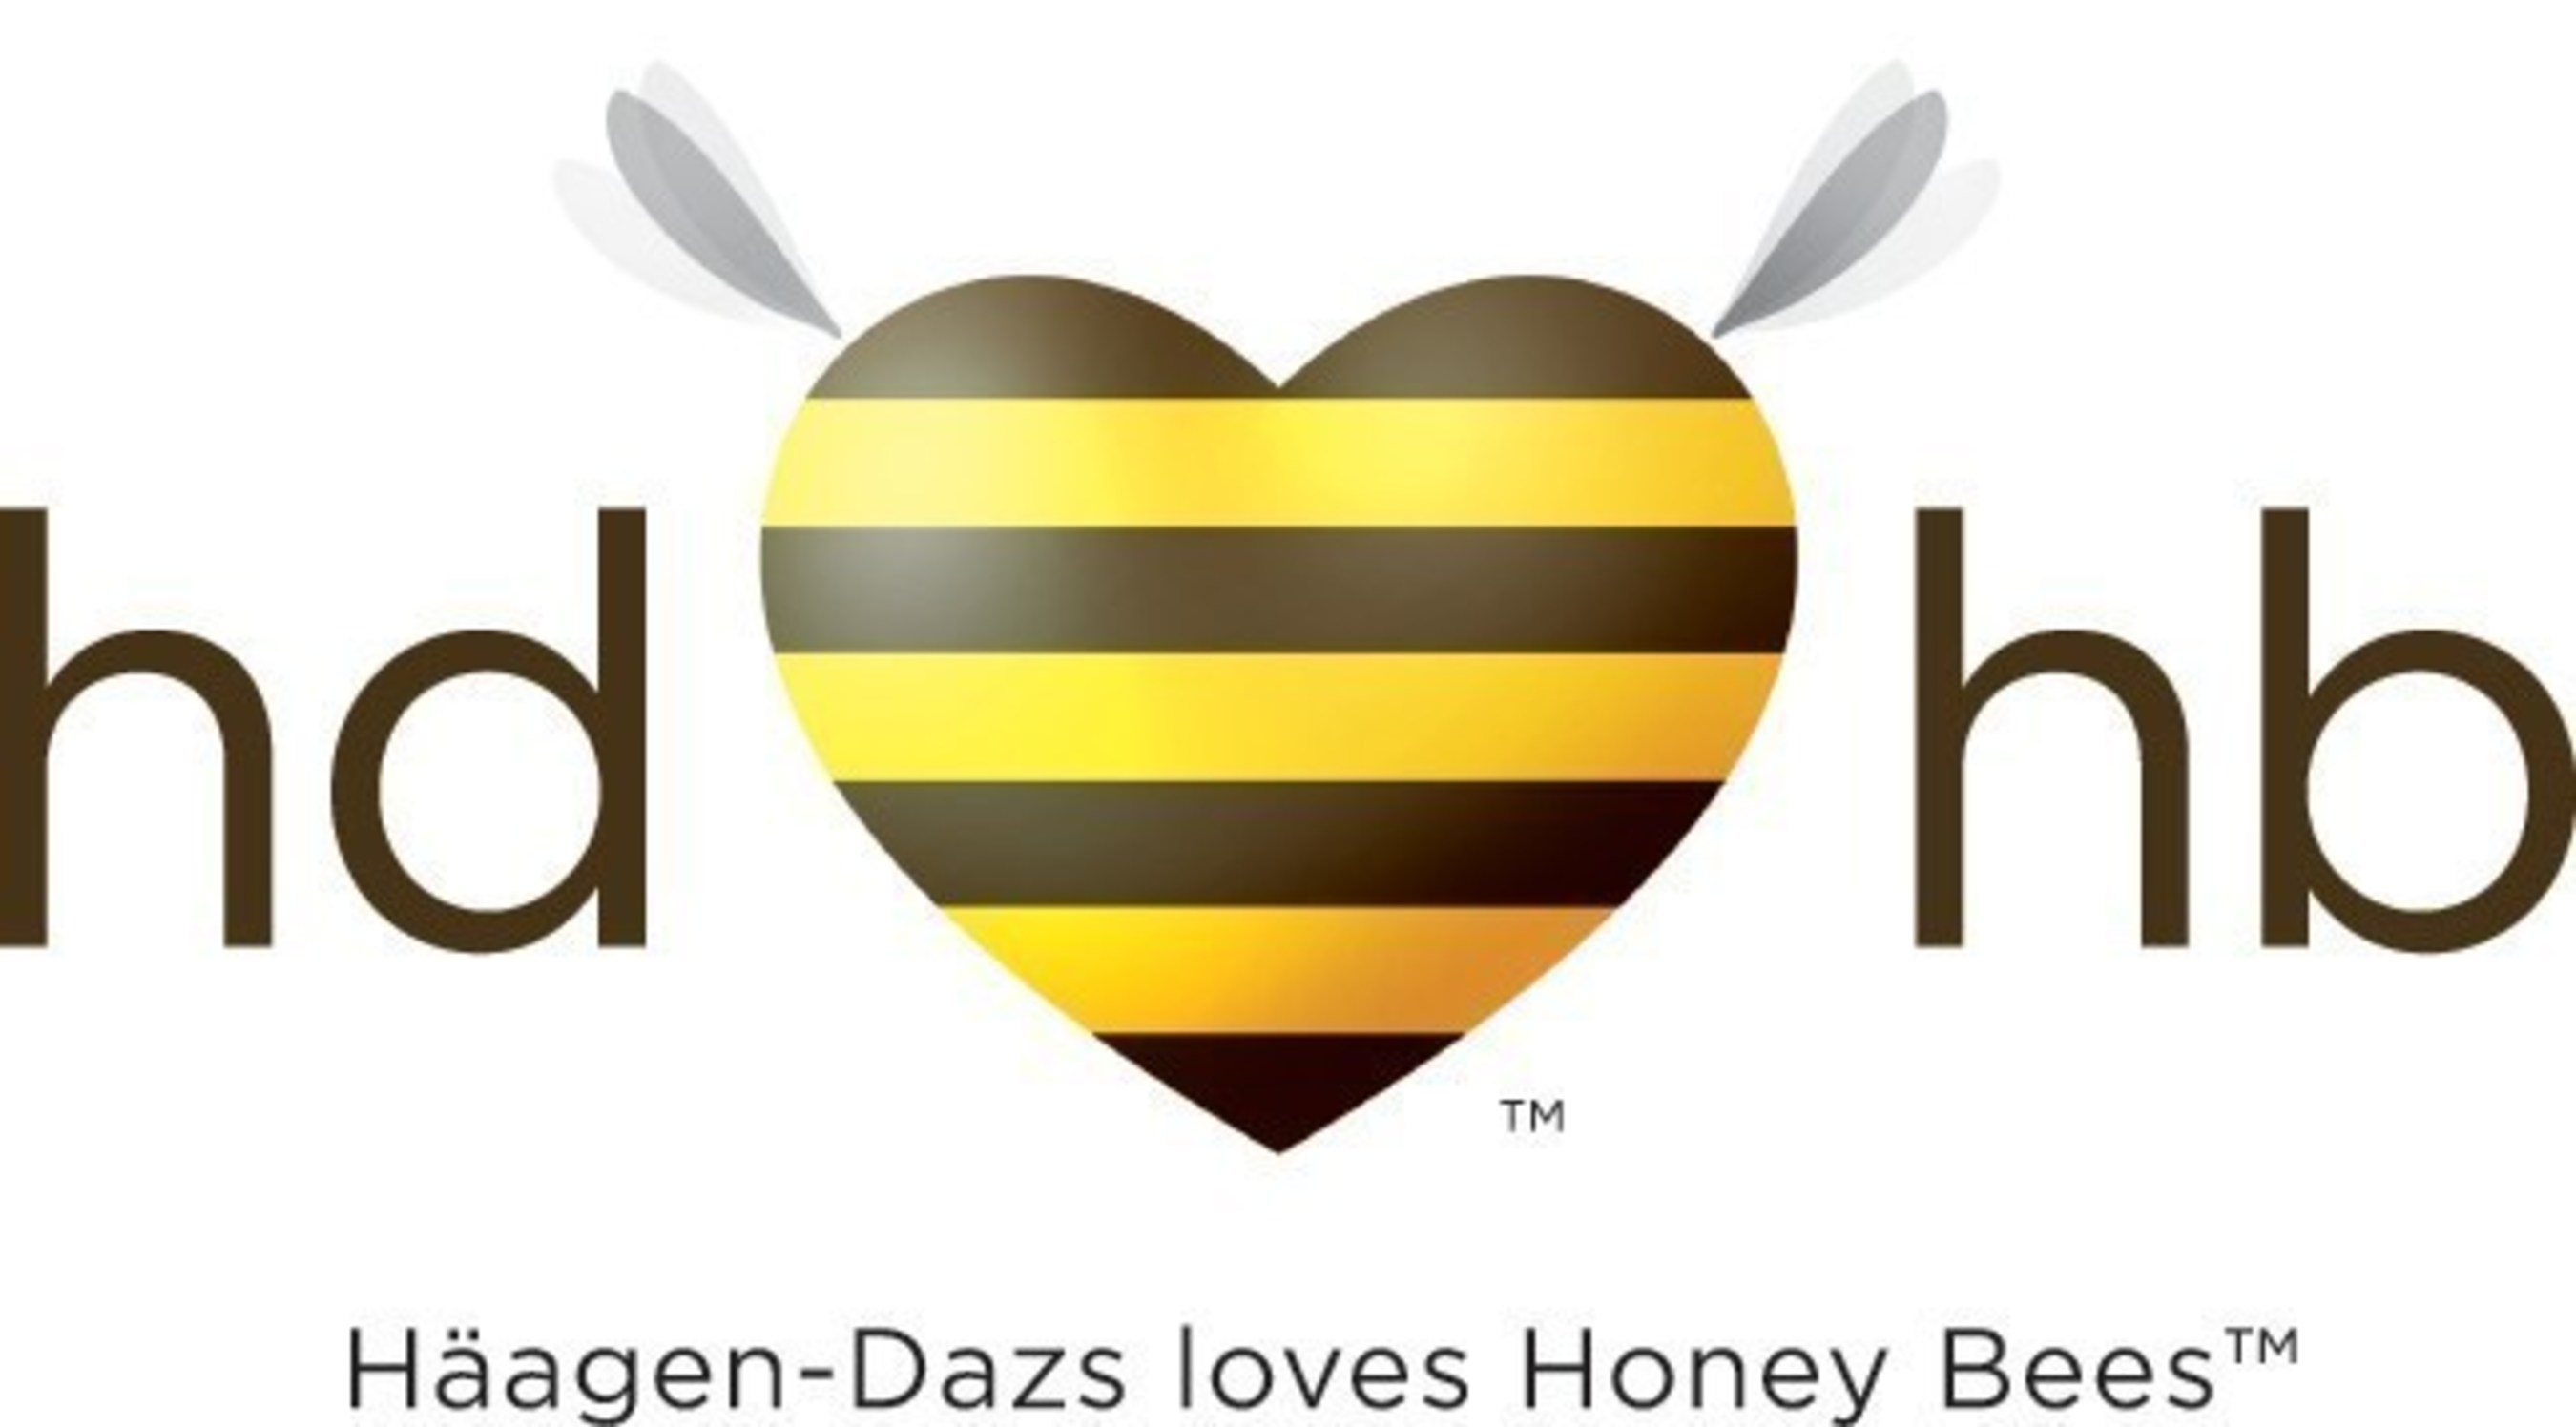 The Haagen-Dazs brand is stepping up its ongoing commitment to the Haagen-Dazs loves Honey Bees(TM) program with a new sustainable agricultural program for its farmer suppliers in partnership with the Xerces Society for Invertebrate Conservation. Over the course of 2015 and 2016, Xerces will work with Haagen-Dazs berry and nut farmers to develop custom farm conservation plans for each farm to include assessments of the existing pollinator habitat and opportunities for improvement...